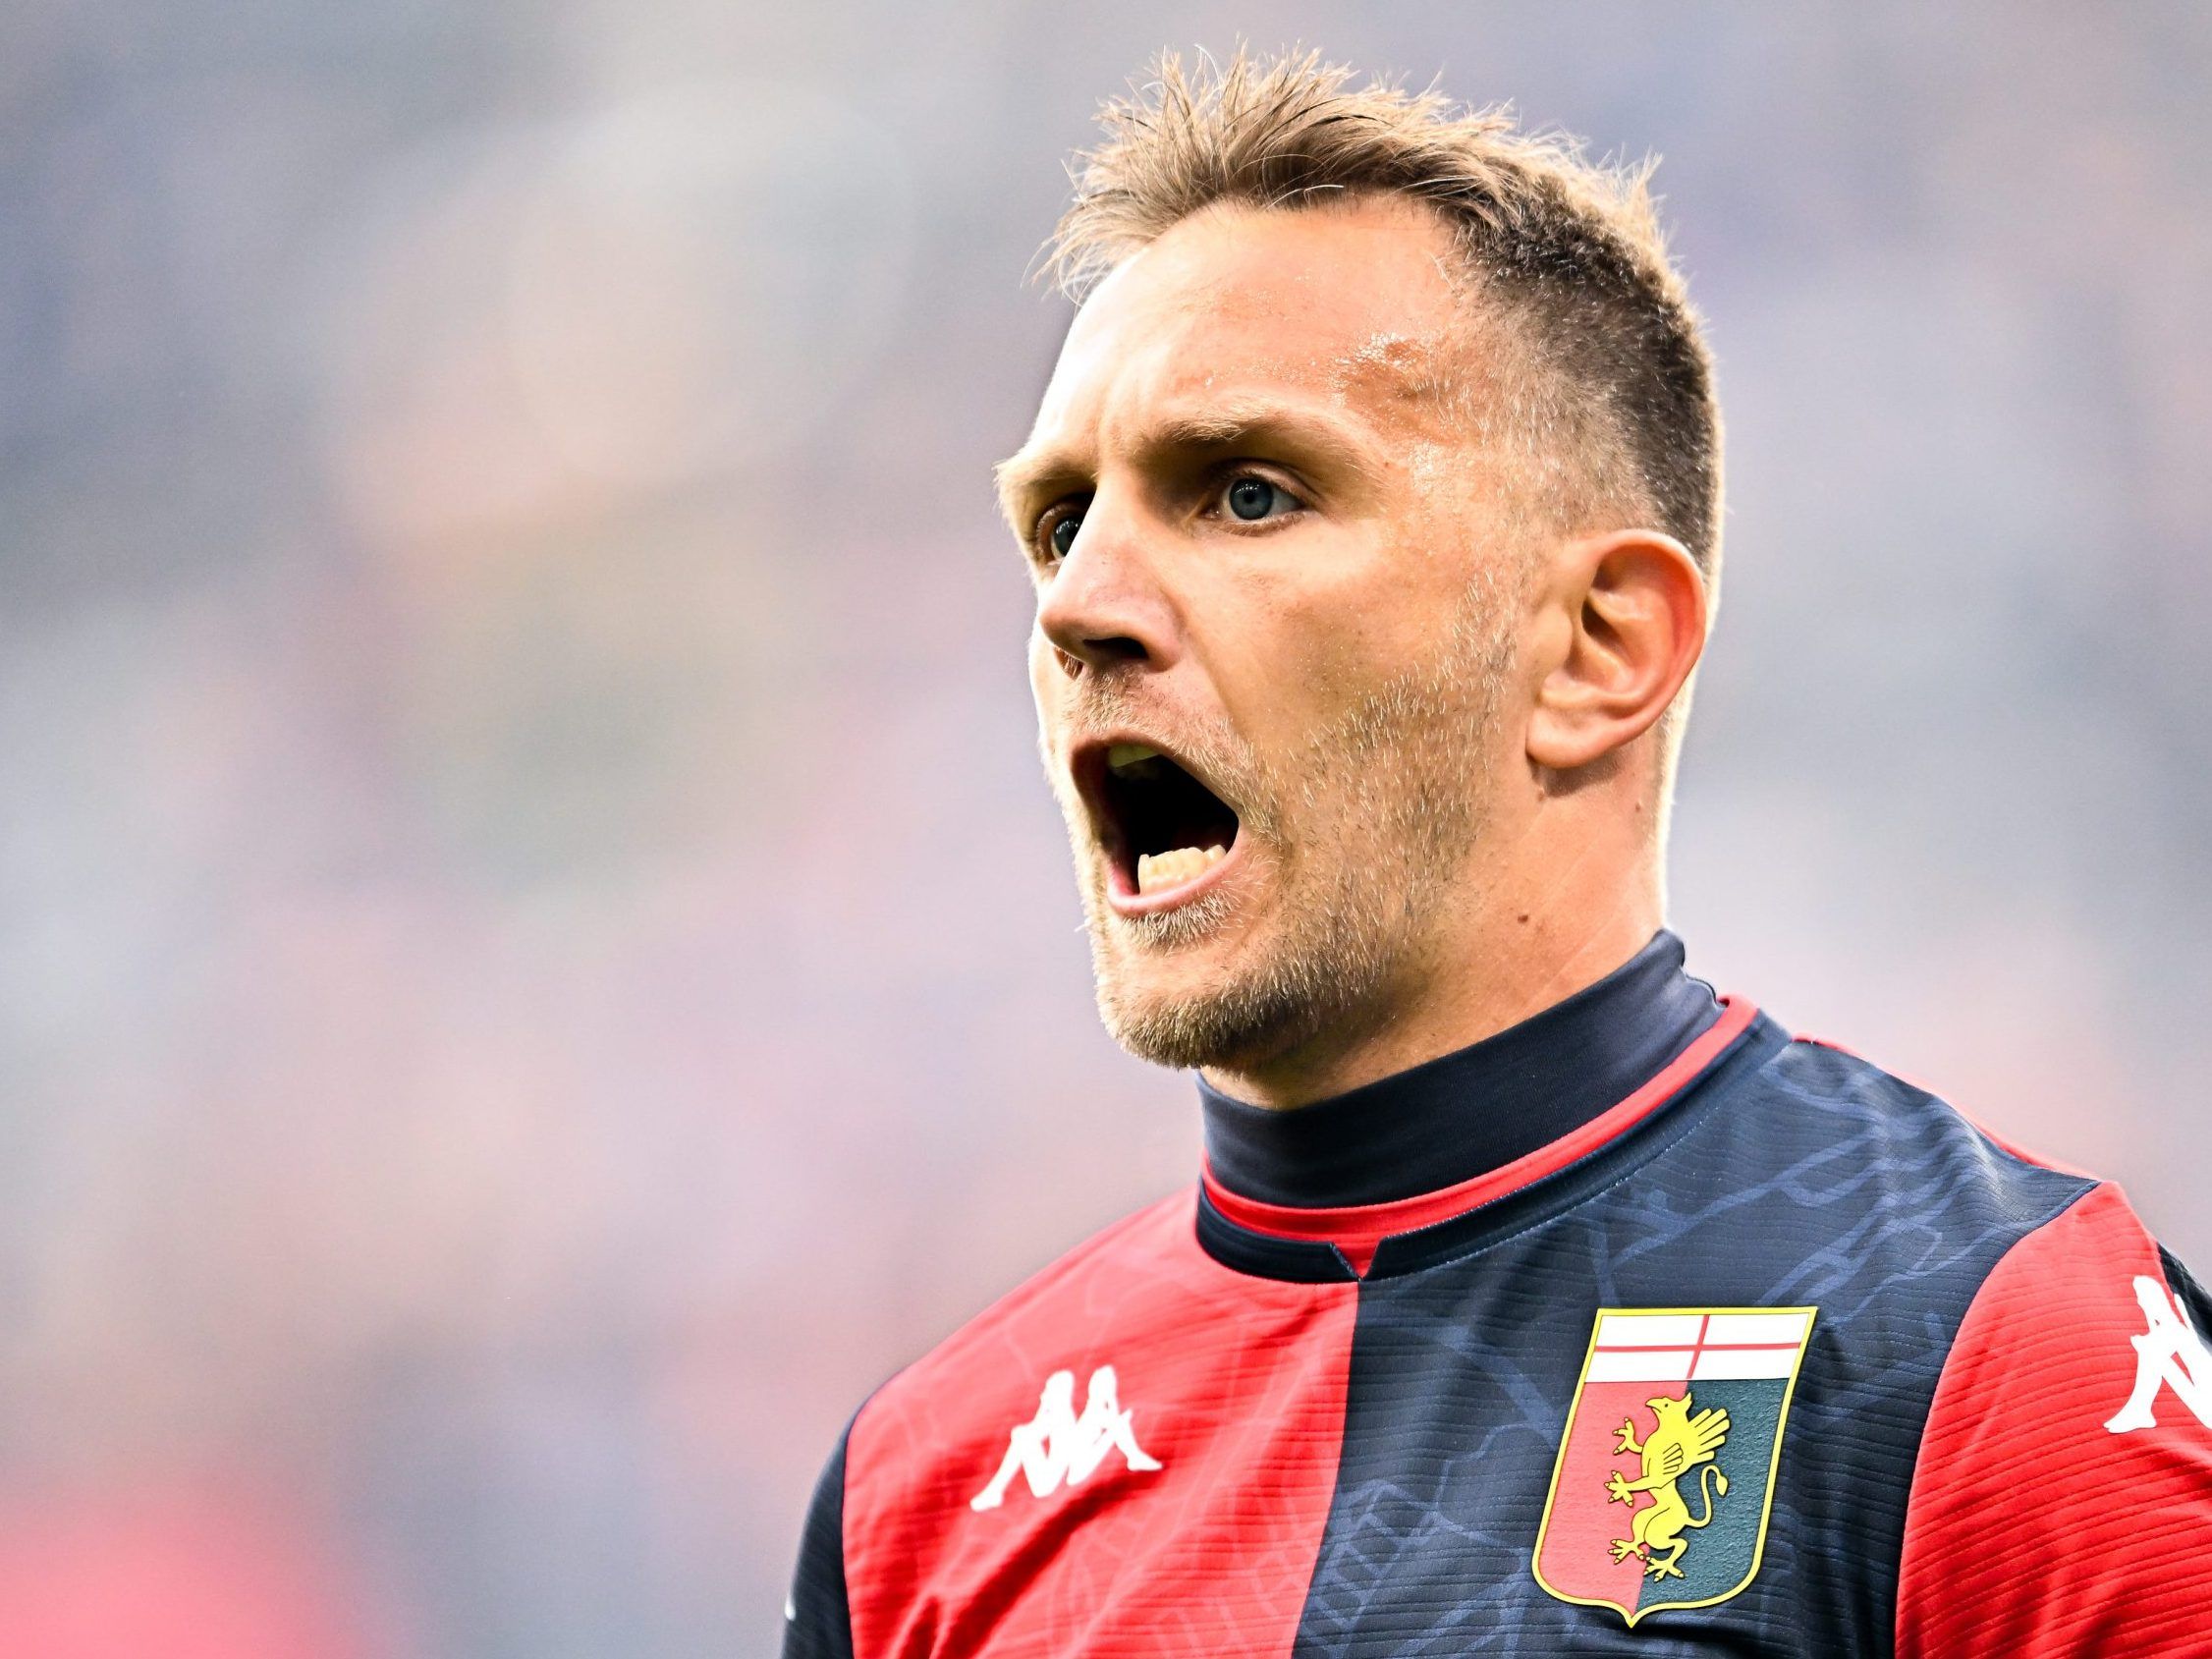 Toronto FC reportedly close to deal with Criscito, interested in Salcedo